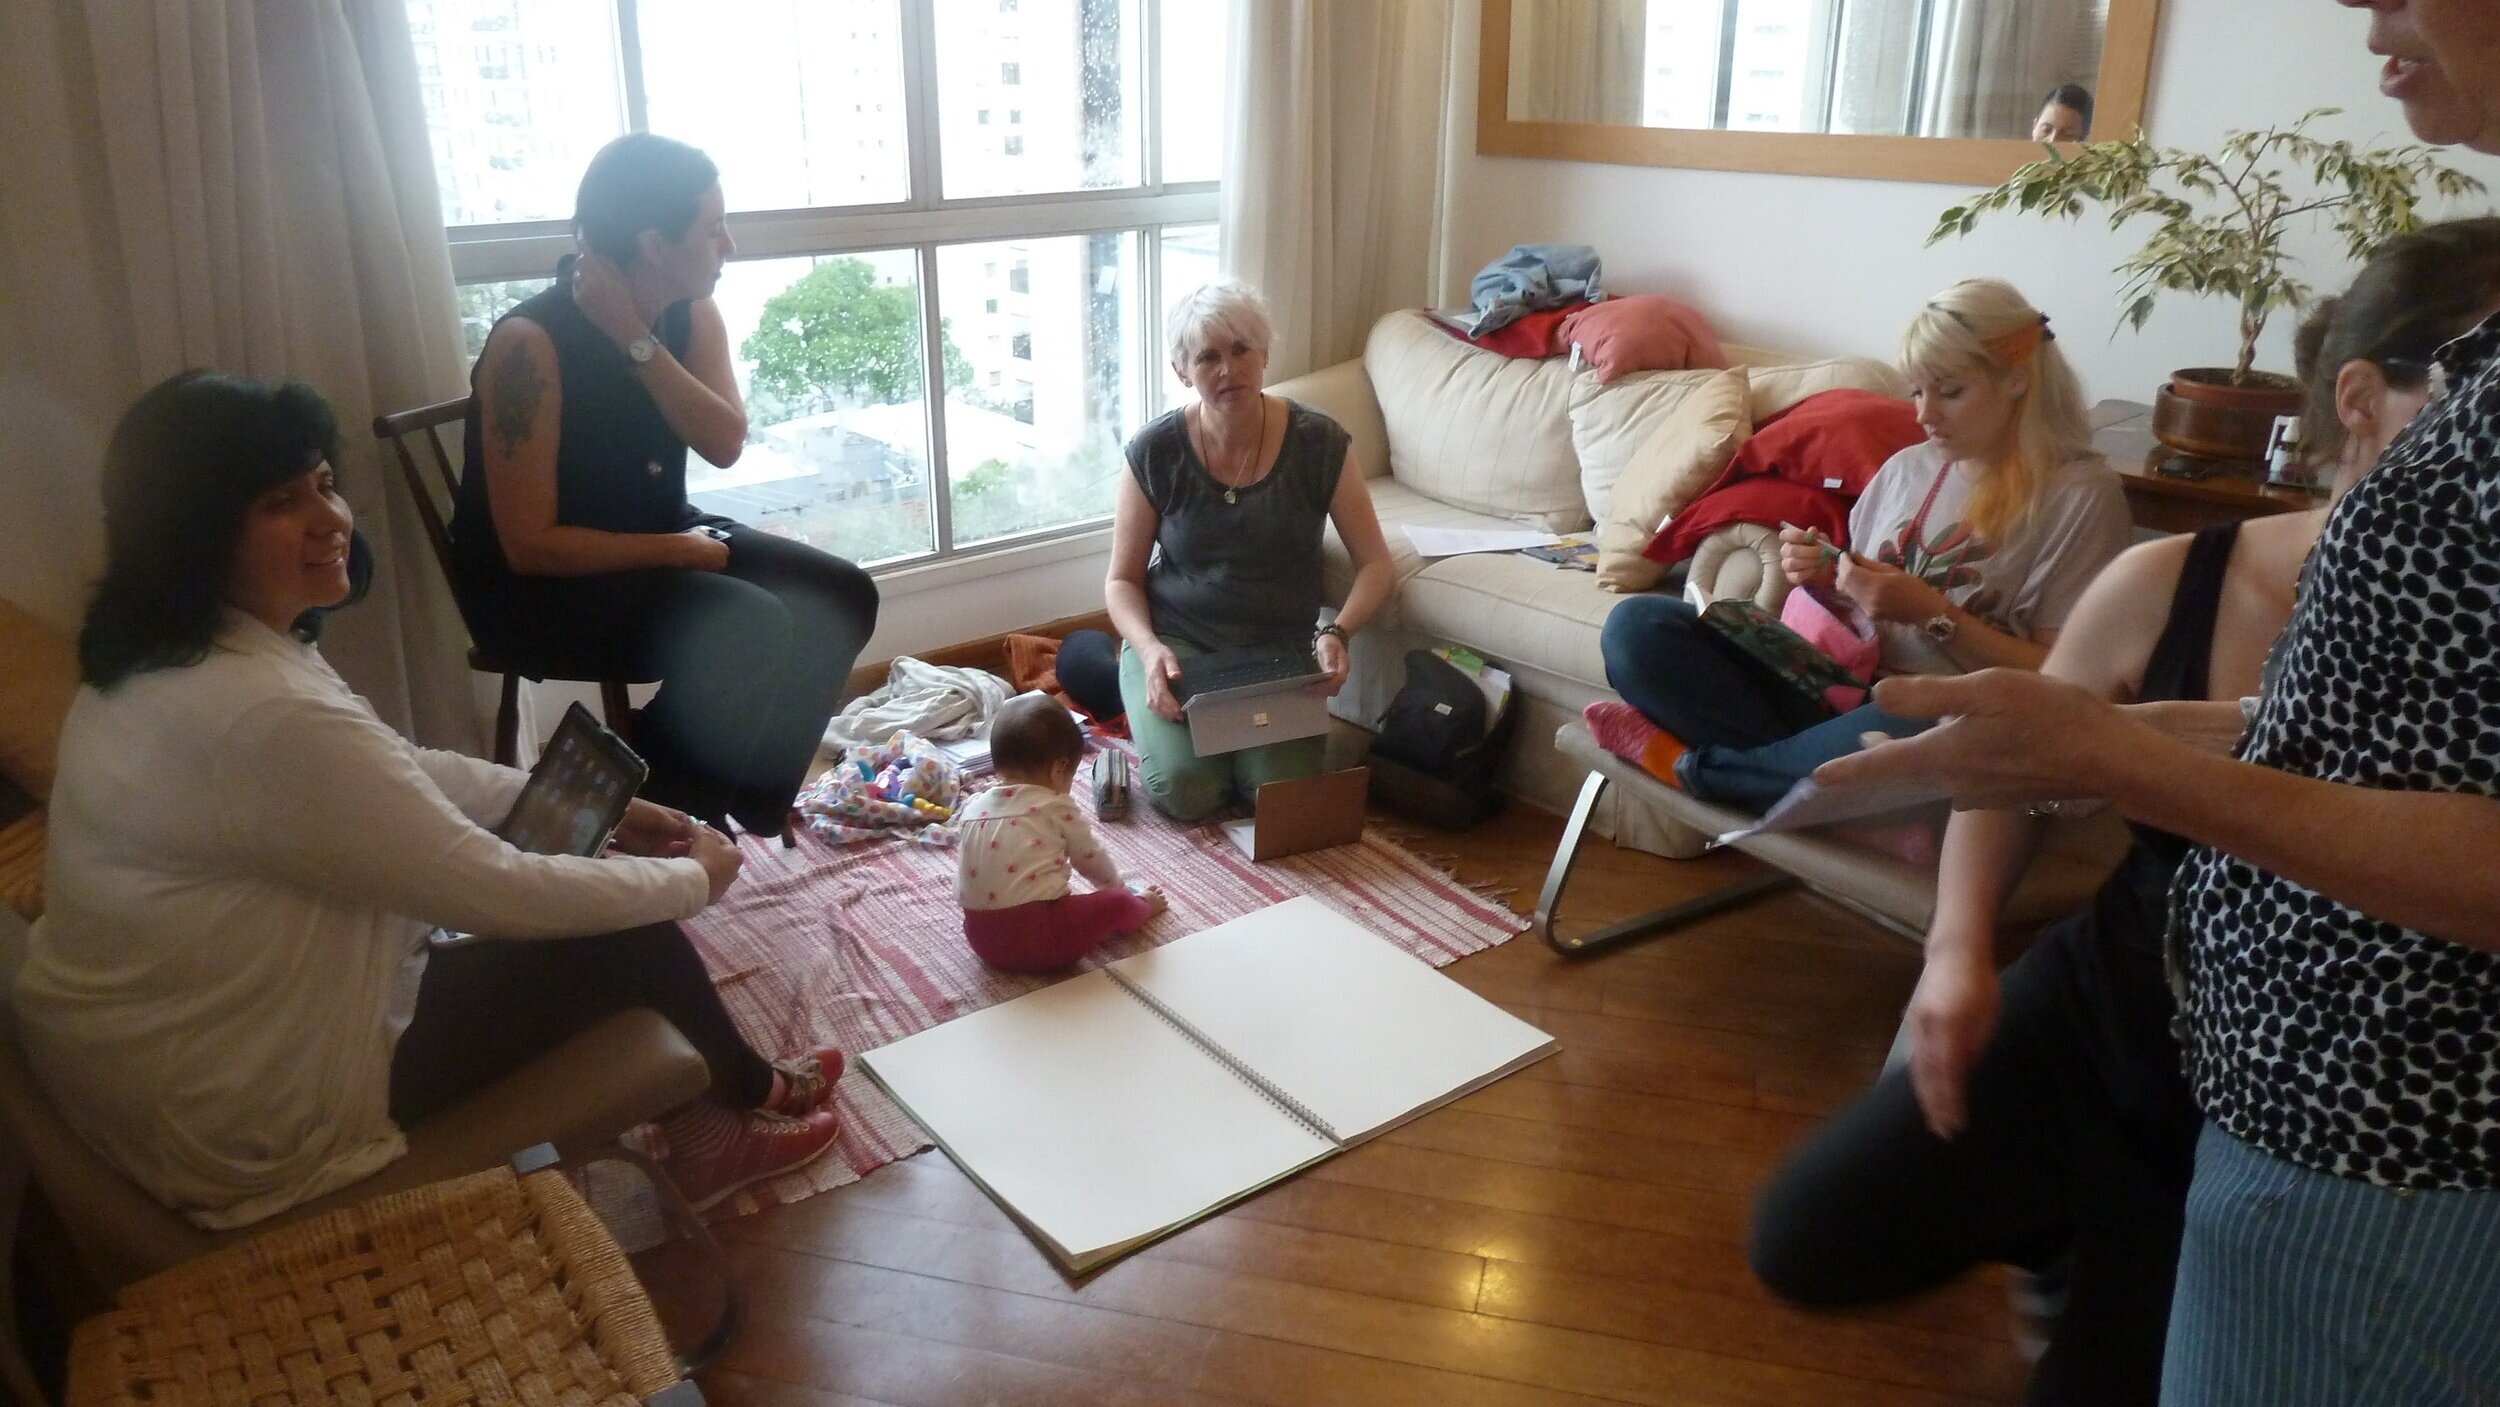 Planning the residential in Sao Paulo with Lorenna Wolffer,  Anni Raw, Sarah-Jane Mason